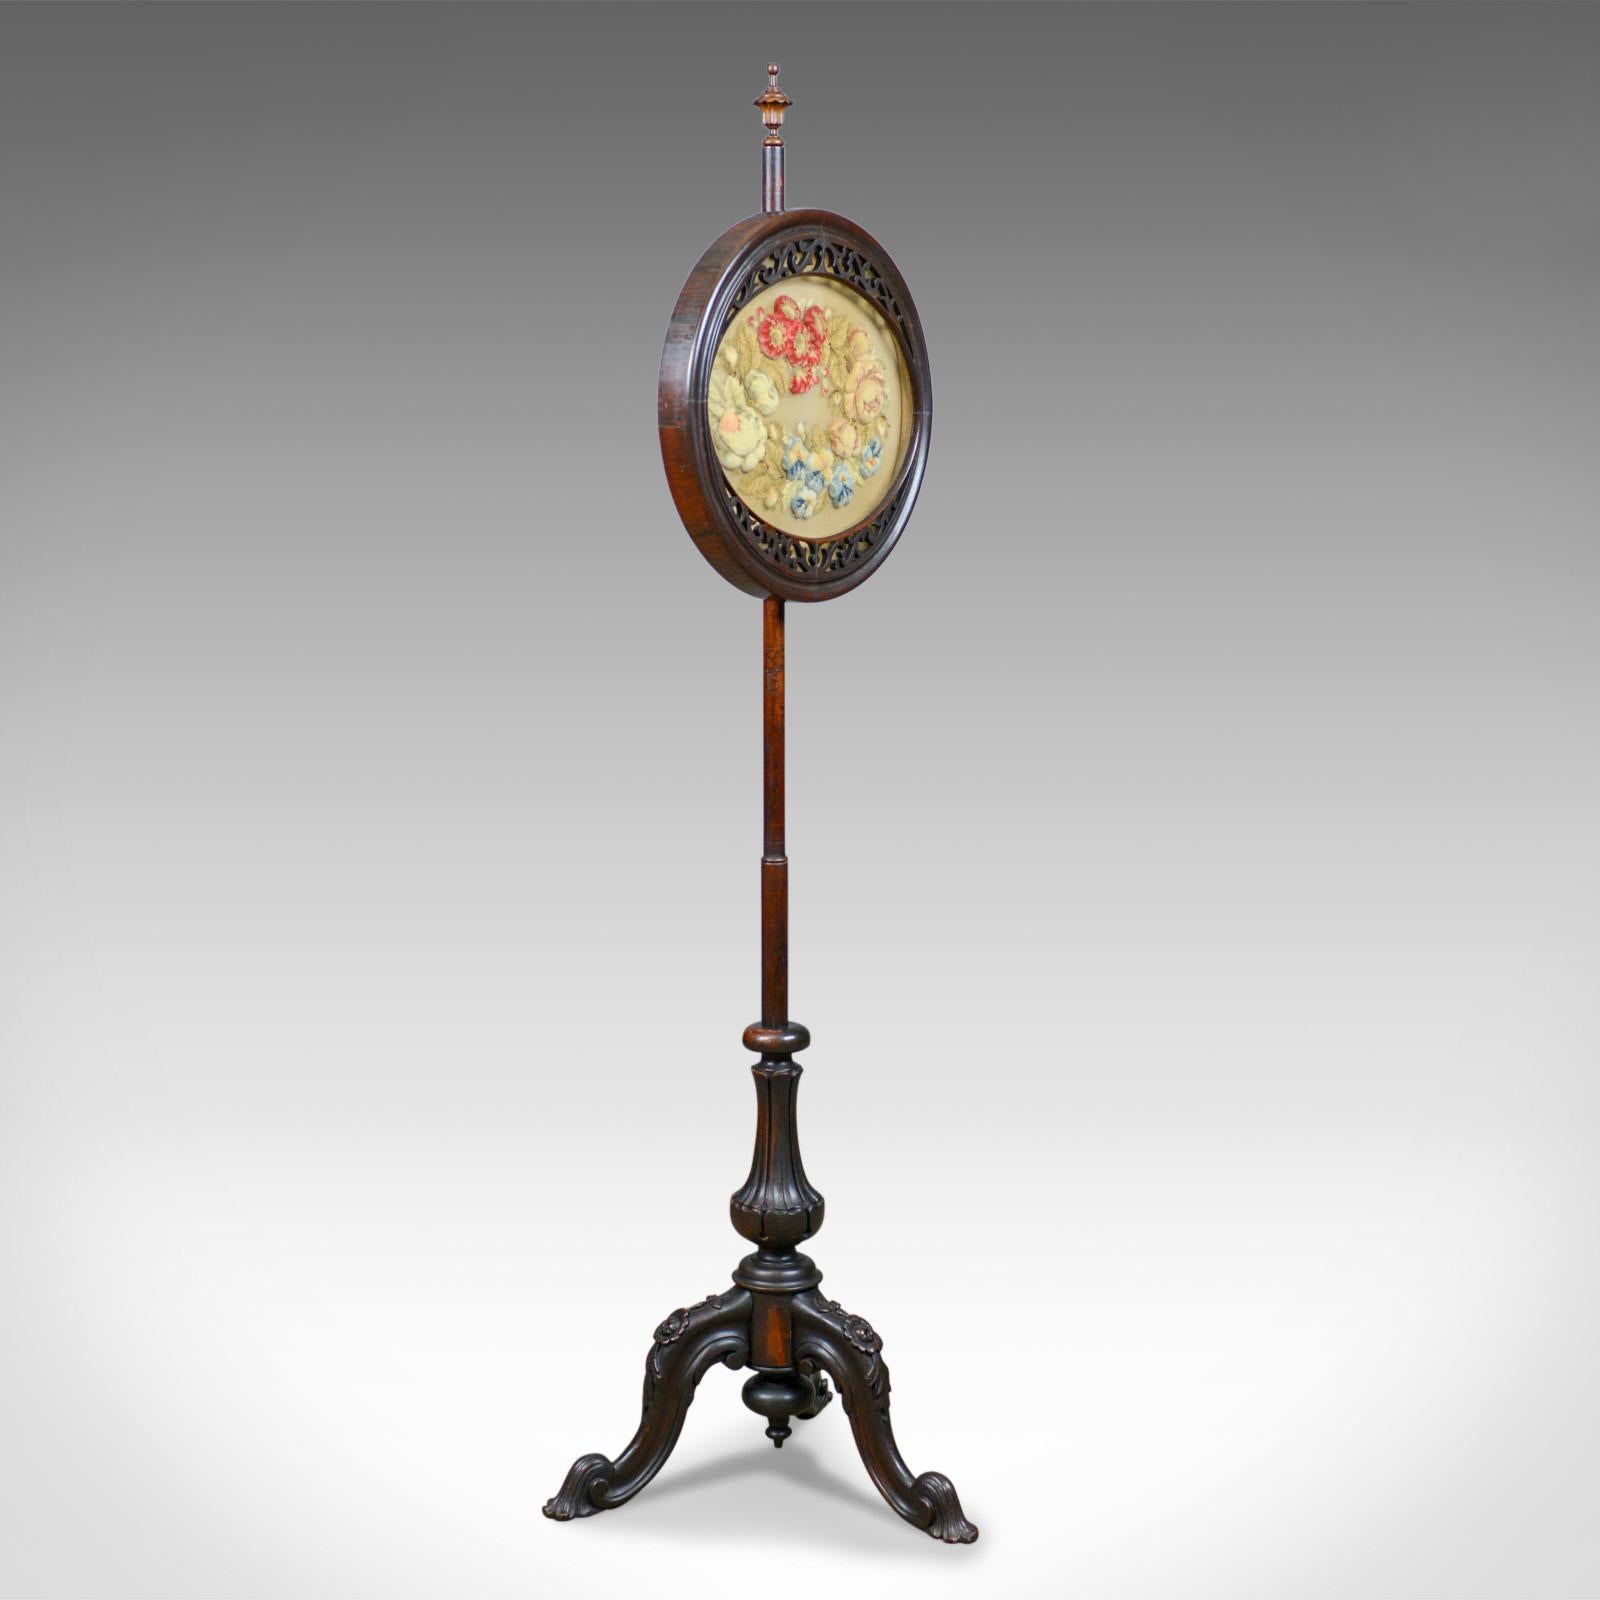 This is an antique pole screen, an English, Regency fire screen in rosewood with crewelwork, needlepoint panel dating to the early 19th century, circa 1820.

Raised on a robust rosewood stand with good color and grain interest
A tripod of